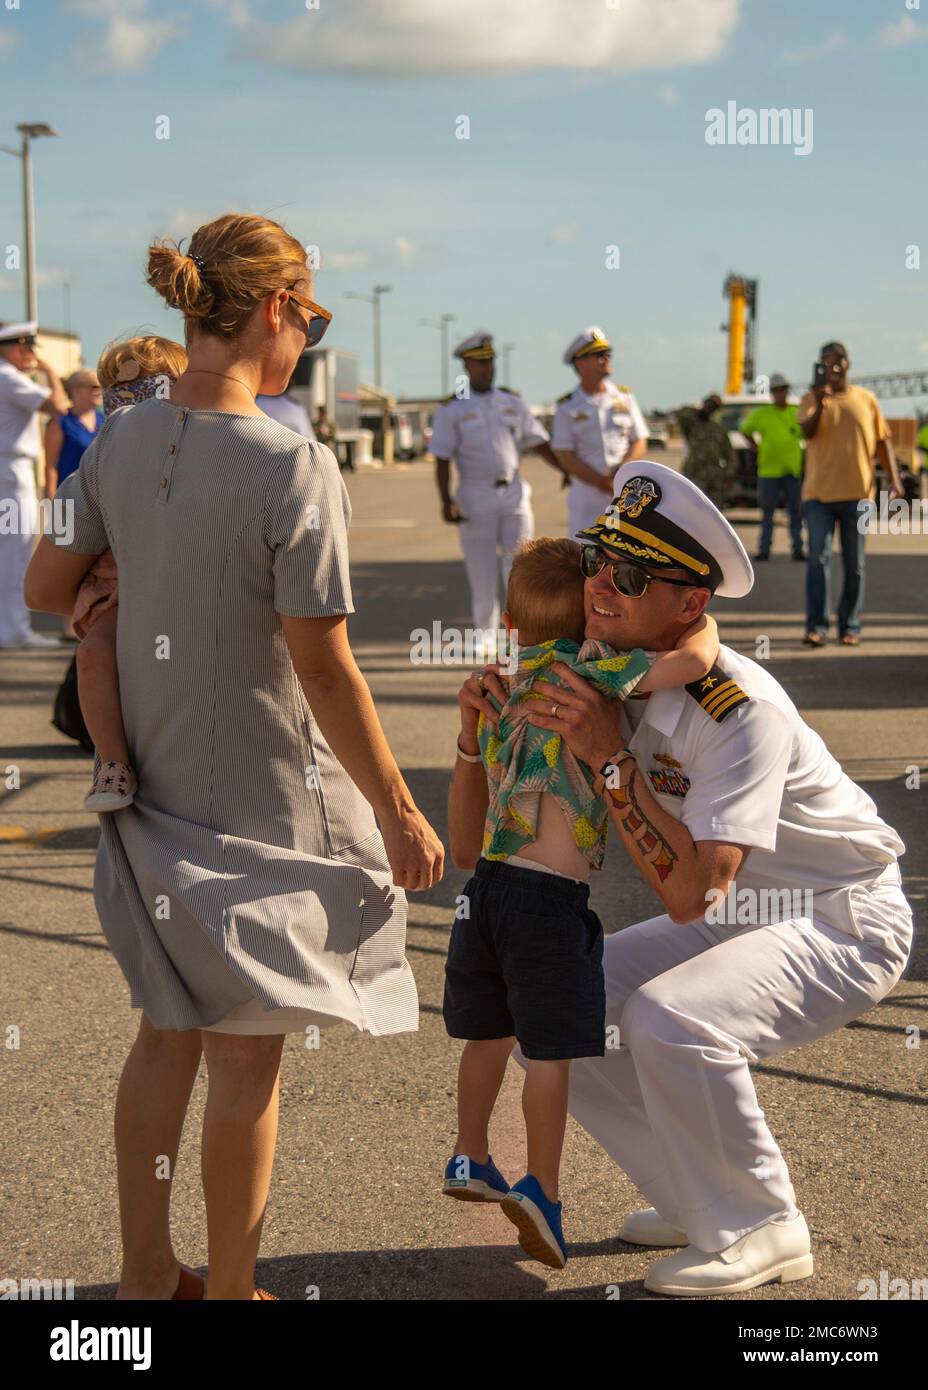 220626-N-UP745-1209  NAVAL STATION MAYPORT, Fla. (June 26, 2022) Cmdr. Robert Keller, executive officer of the Arleigh Burke-class guided-missile destroyer USS Jason Dunham (DDG 109), reunites with his family as the ship returns to Naval Station Mayport, Florida after a regularly scheduled deployment in support of maritime security operations and theater security cooperation efforts, June 26. Jason Dunham was deployed as part of the Harry S. Truman Carrier Strike Group. Stock Photo